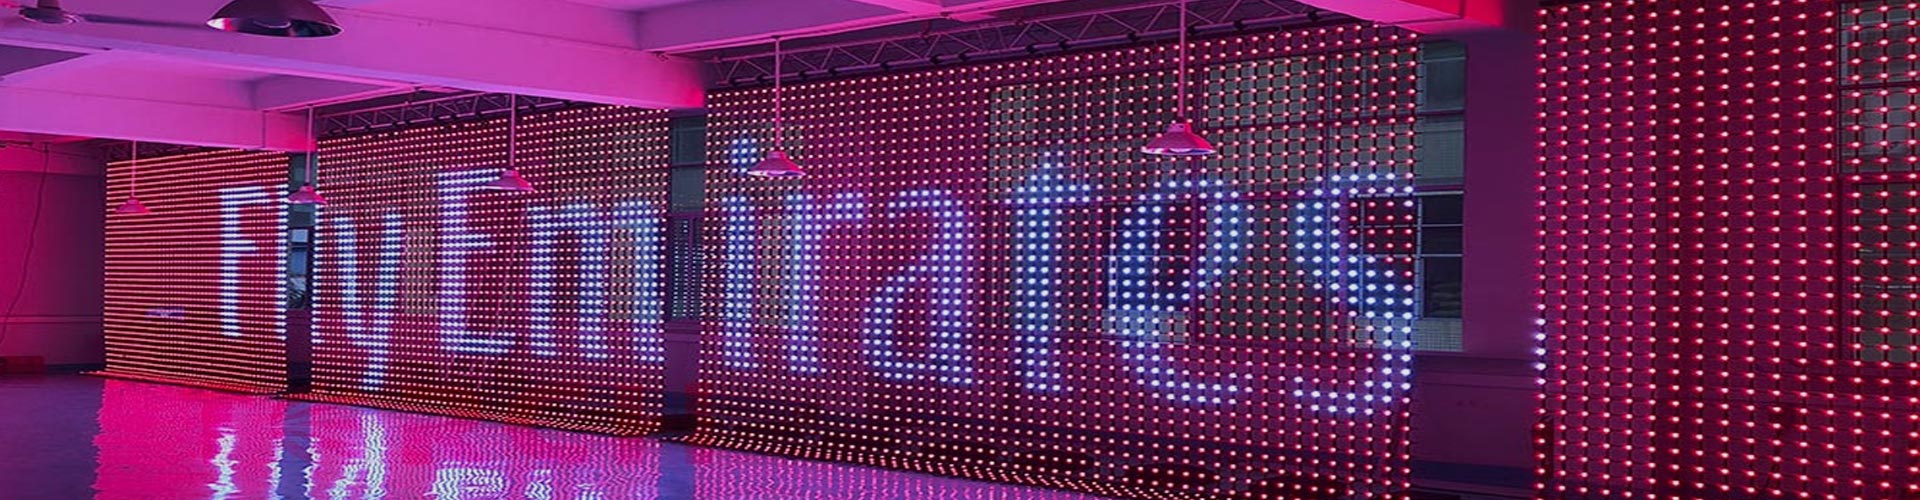 Grid LED Displays Are Being Tested In Factories